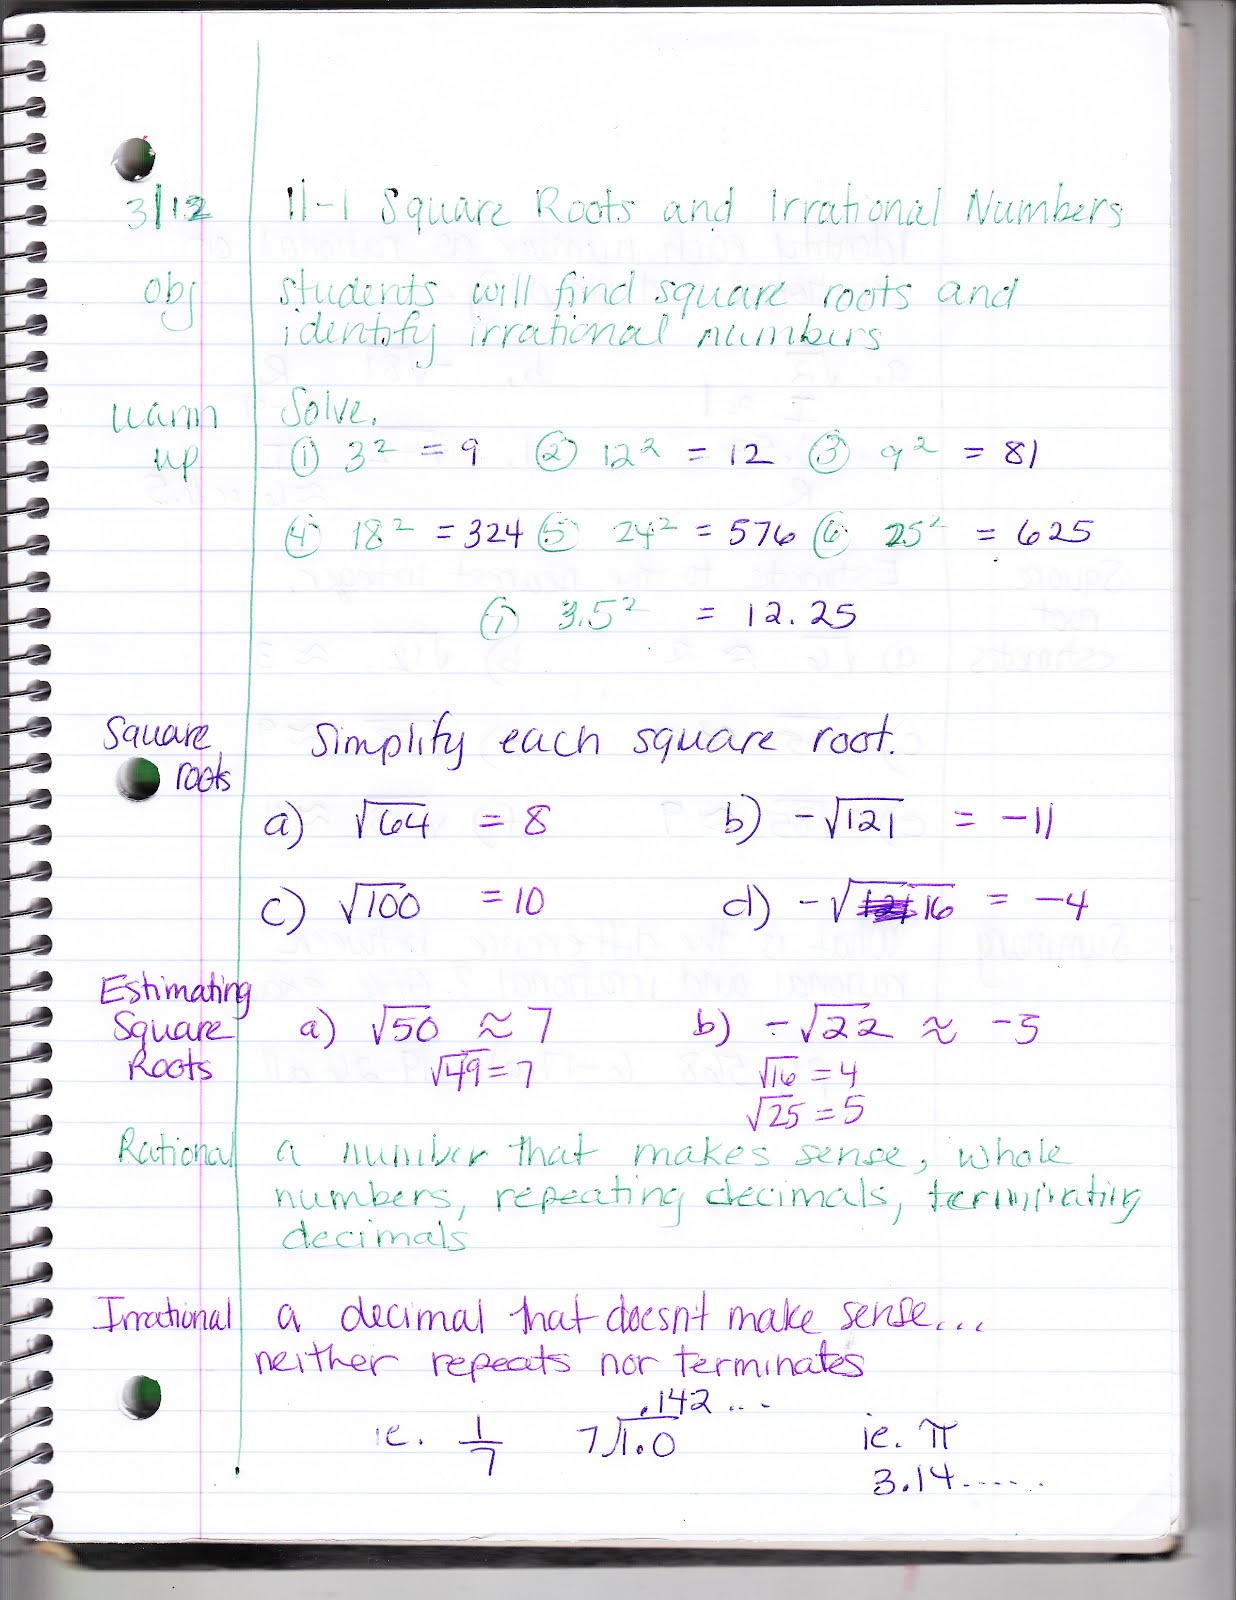 ms-jean-s-classroom-blog-11-1-square-roots-and-irrational-numbers